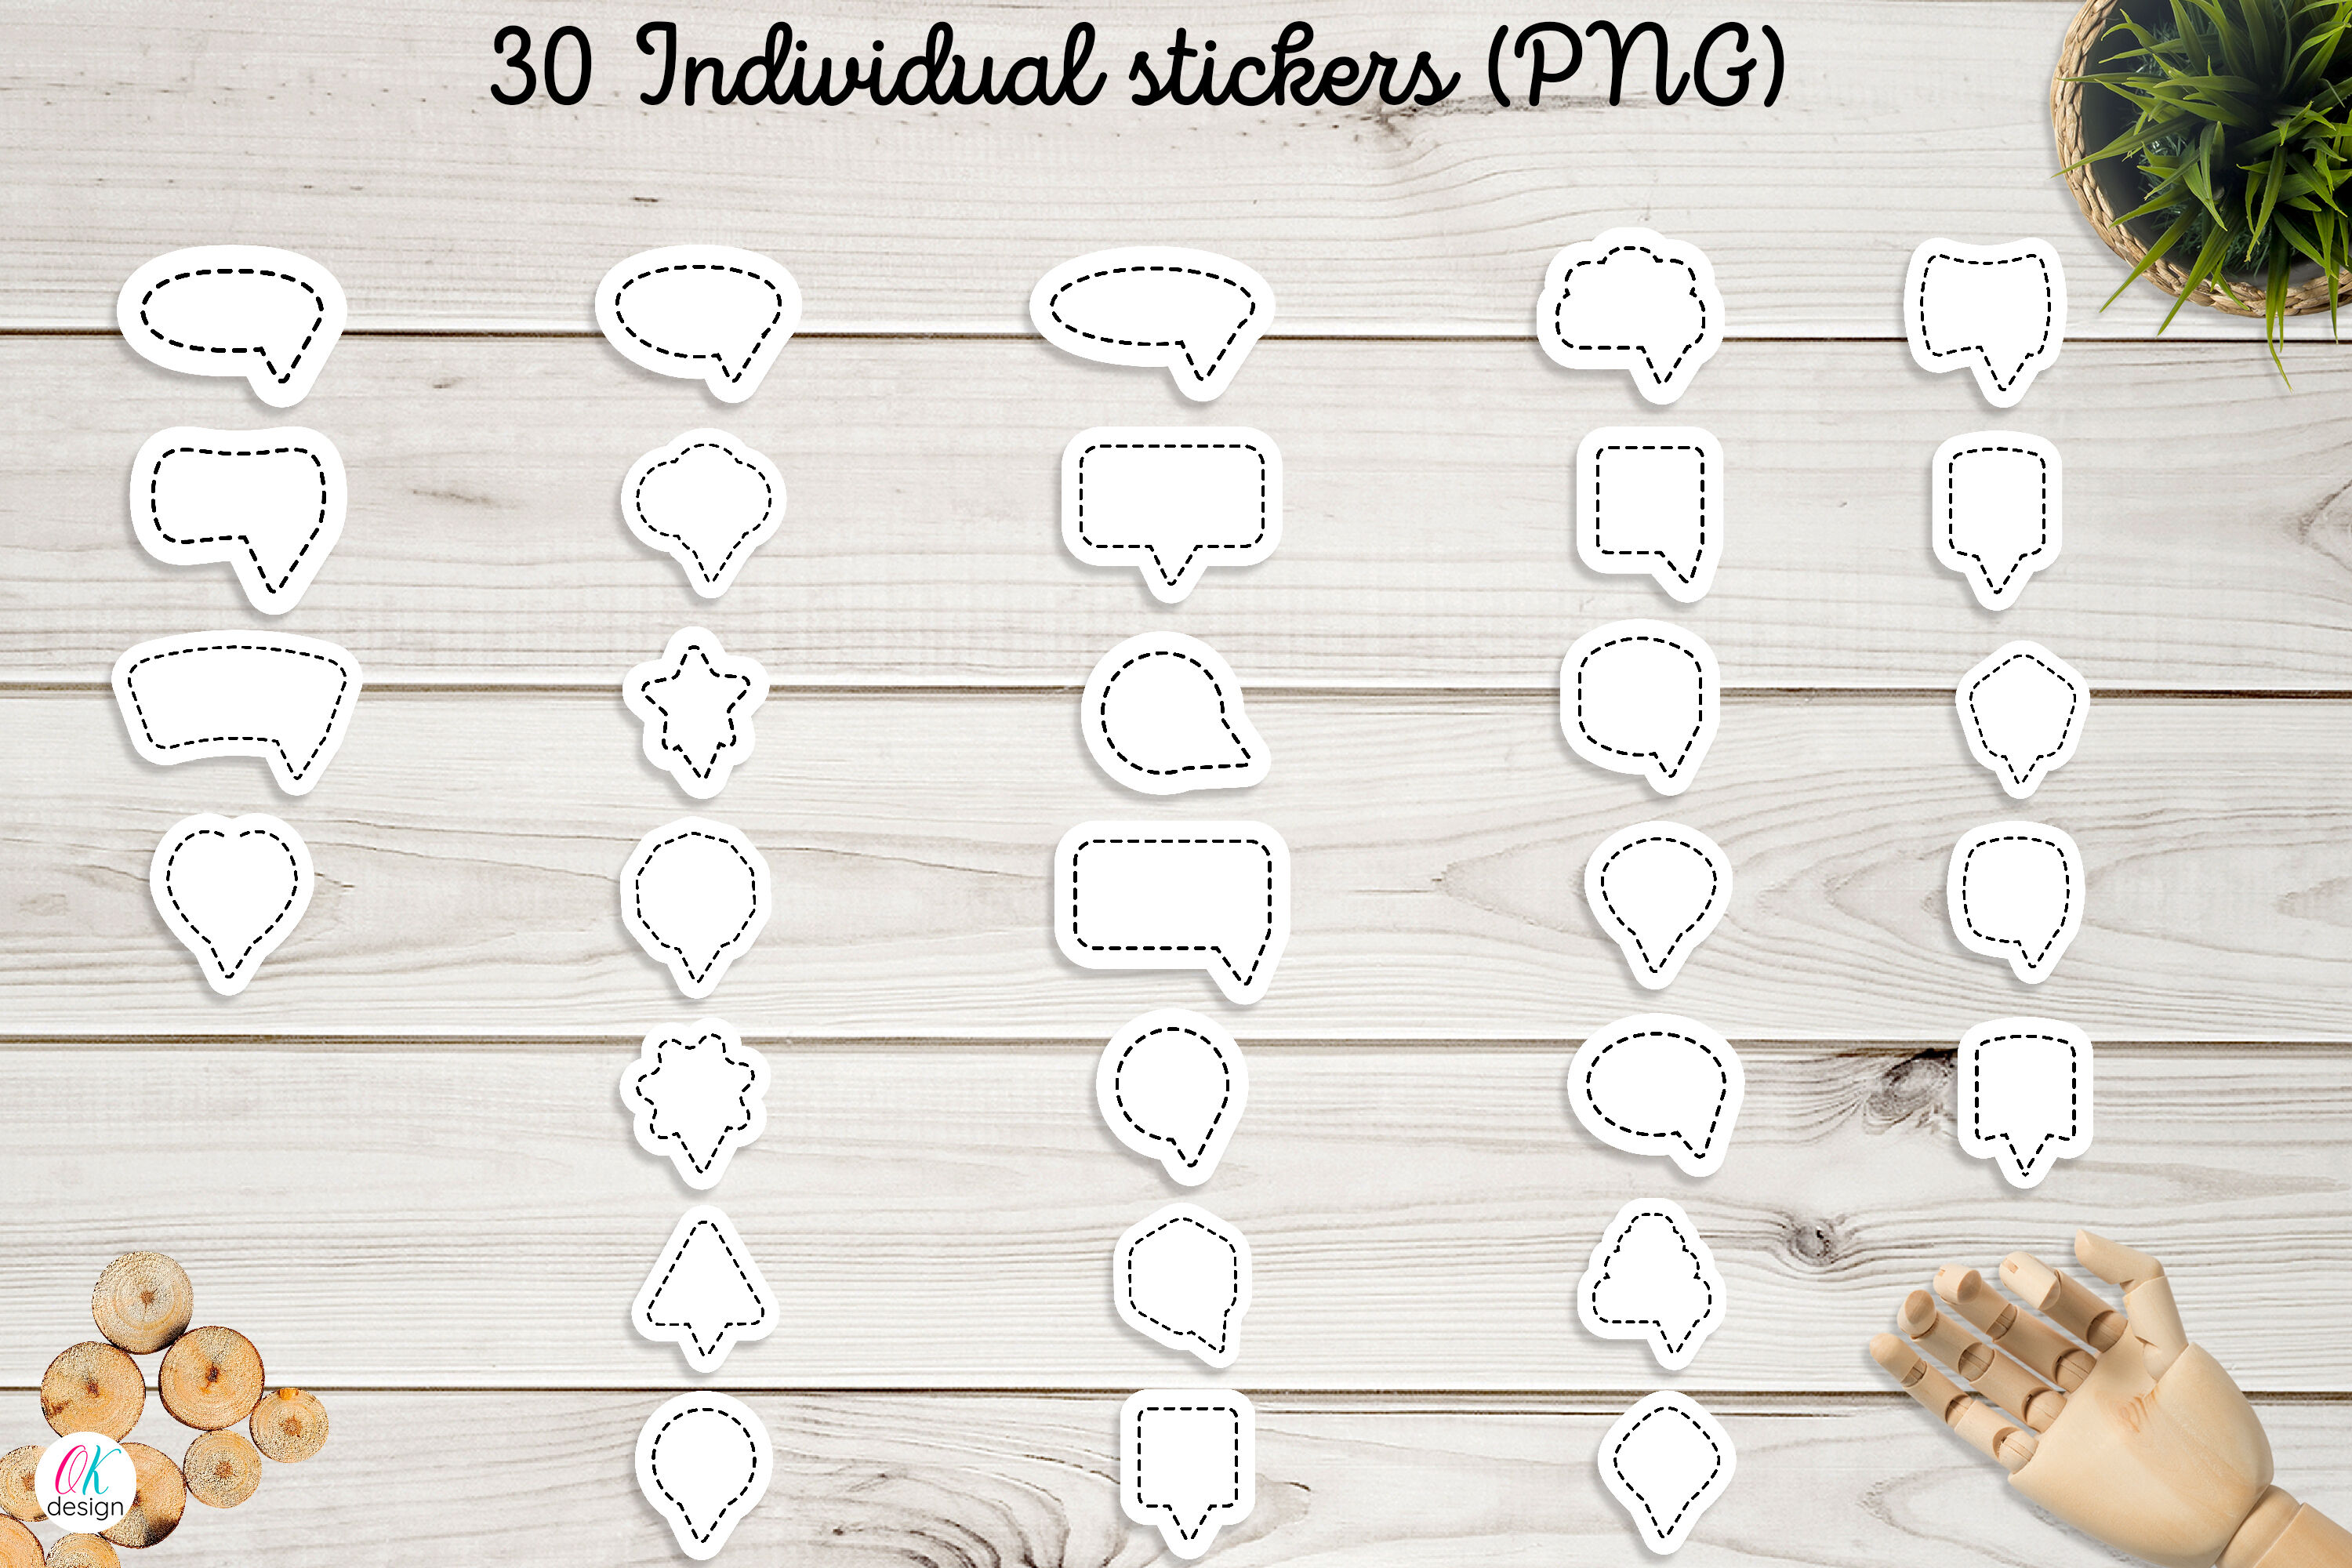 Speech and Thought Bubble Stickers - A Sticker Bundle